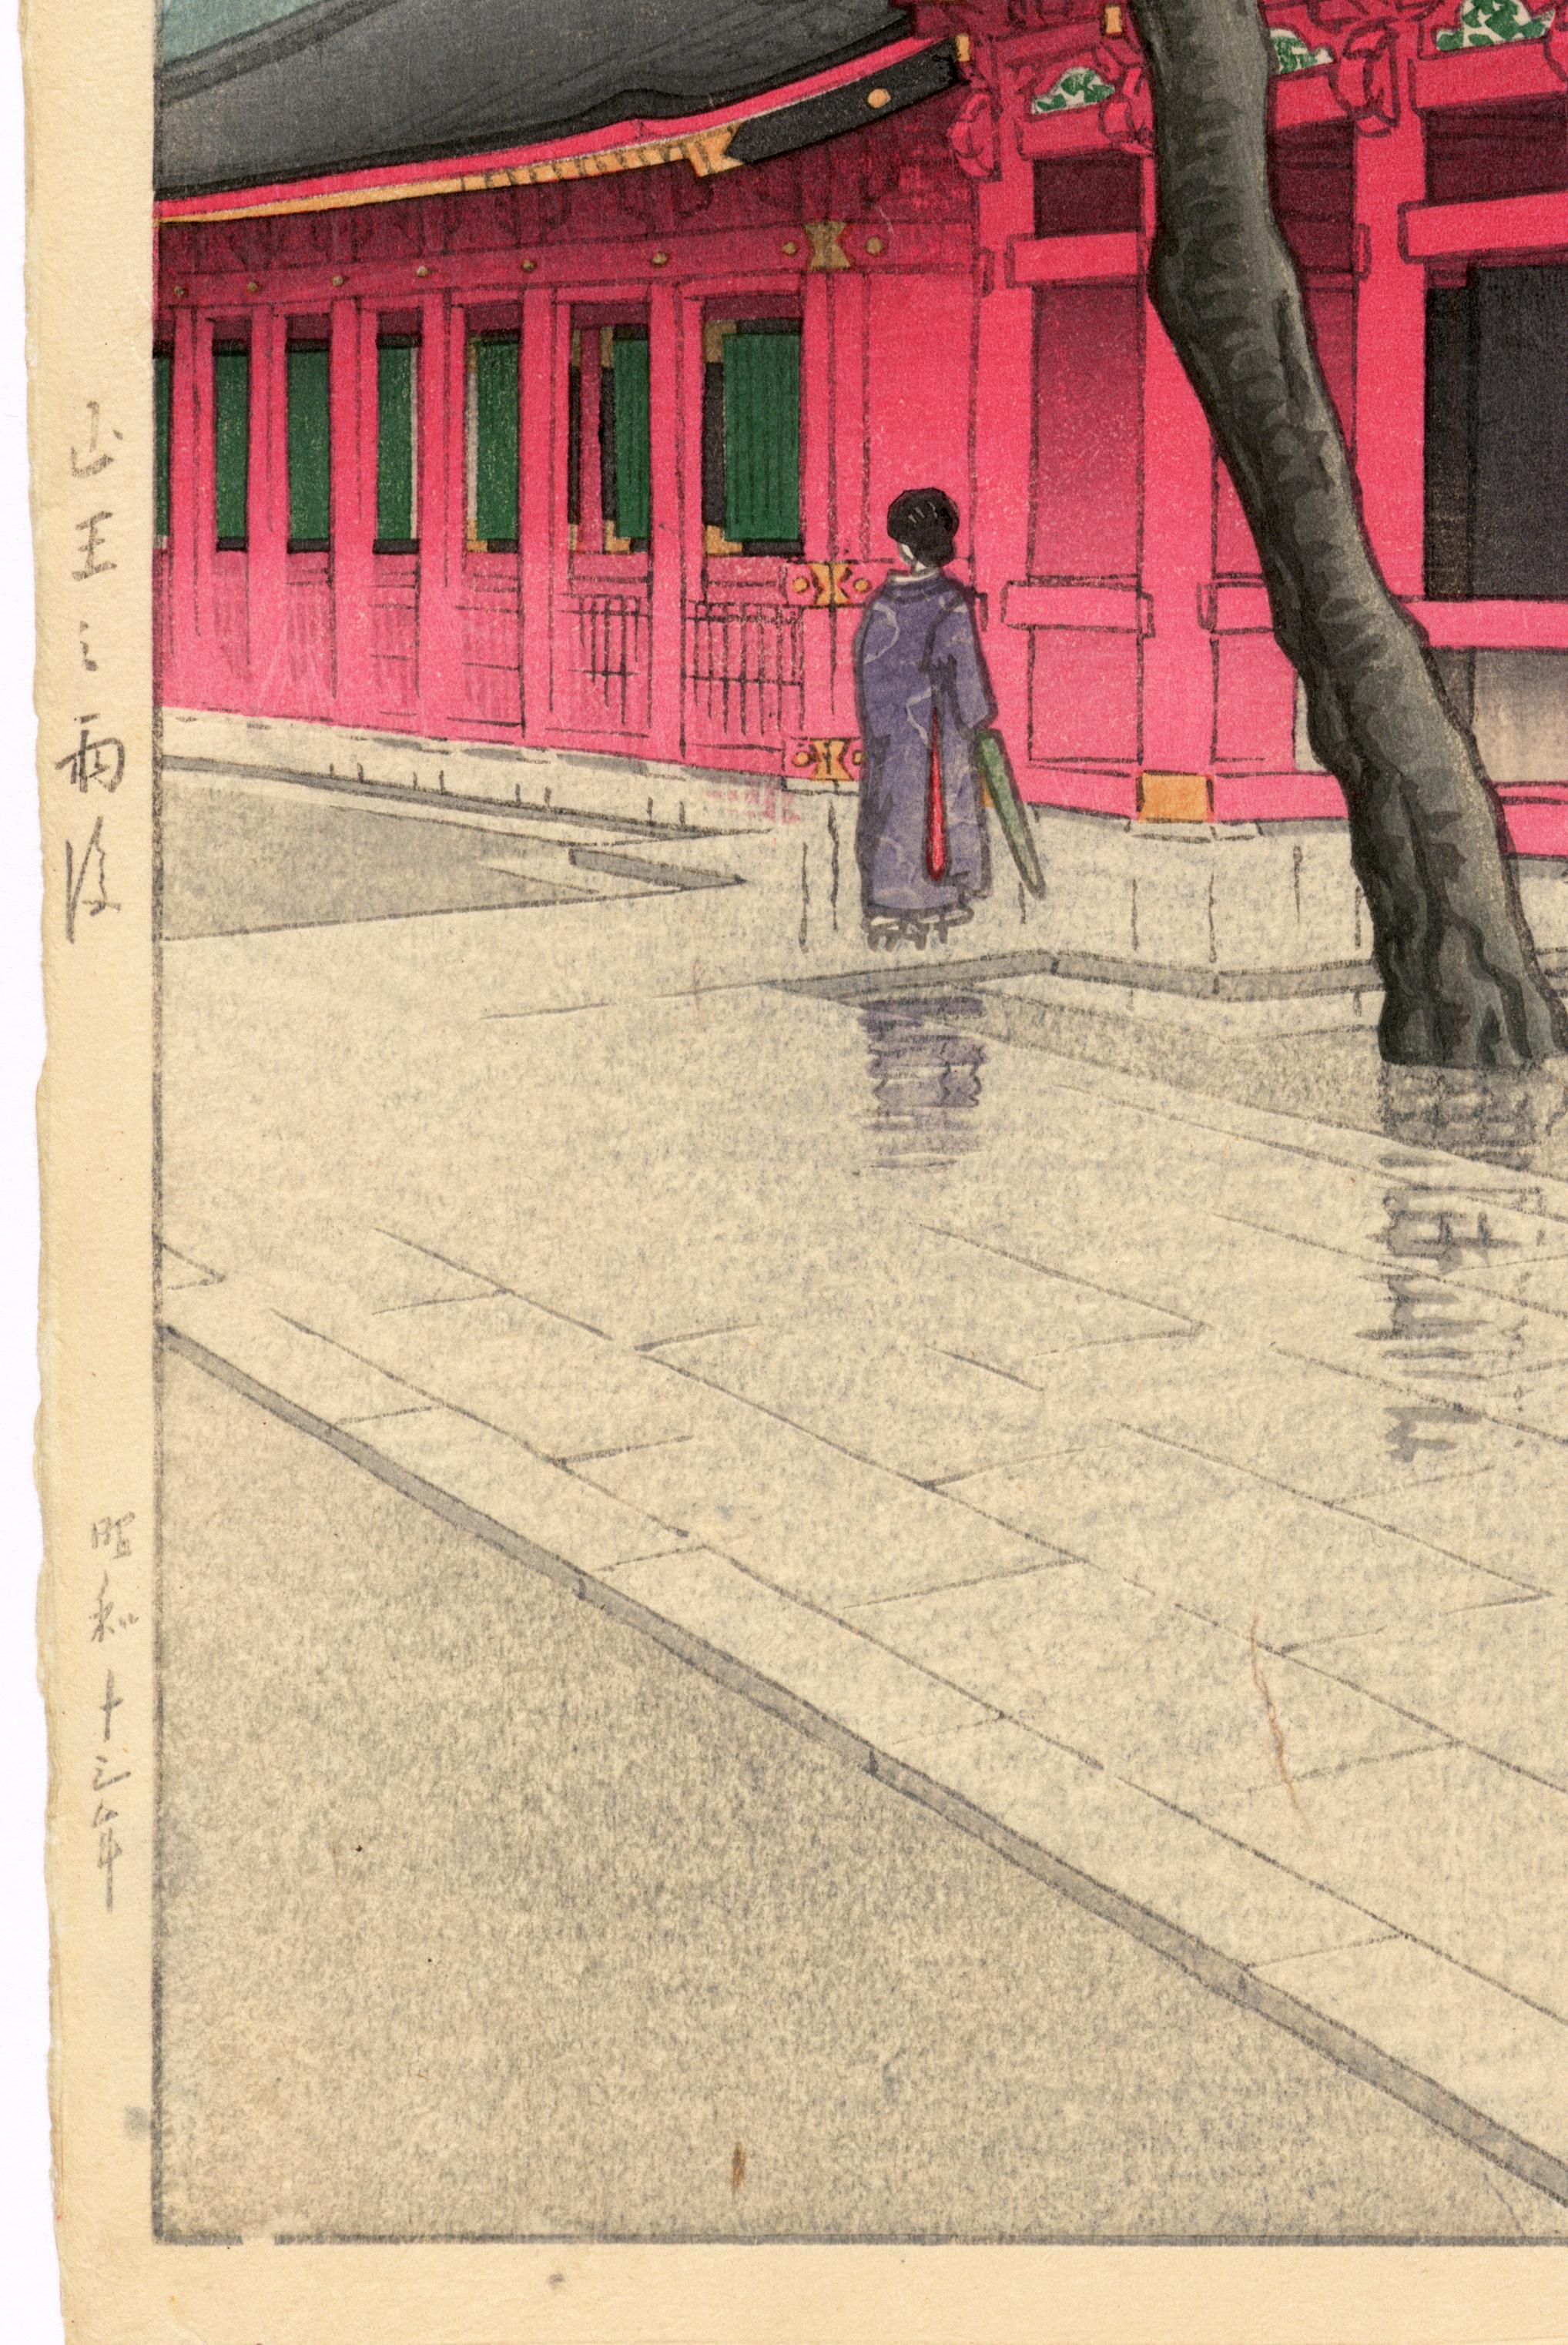 The rain has just stopped, leading the single visitor this Tokyo shrine to fold her umbrella. The paving stones are slick with rain, and the shrine colors are softly muted to match the tones of an overcast day. Works by this artist are often faded